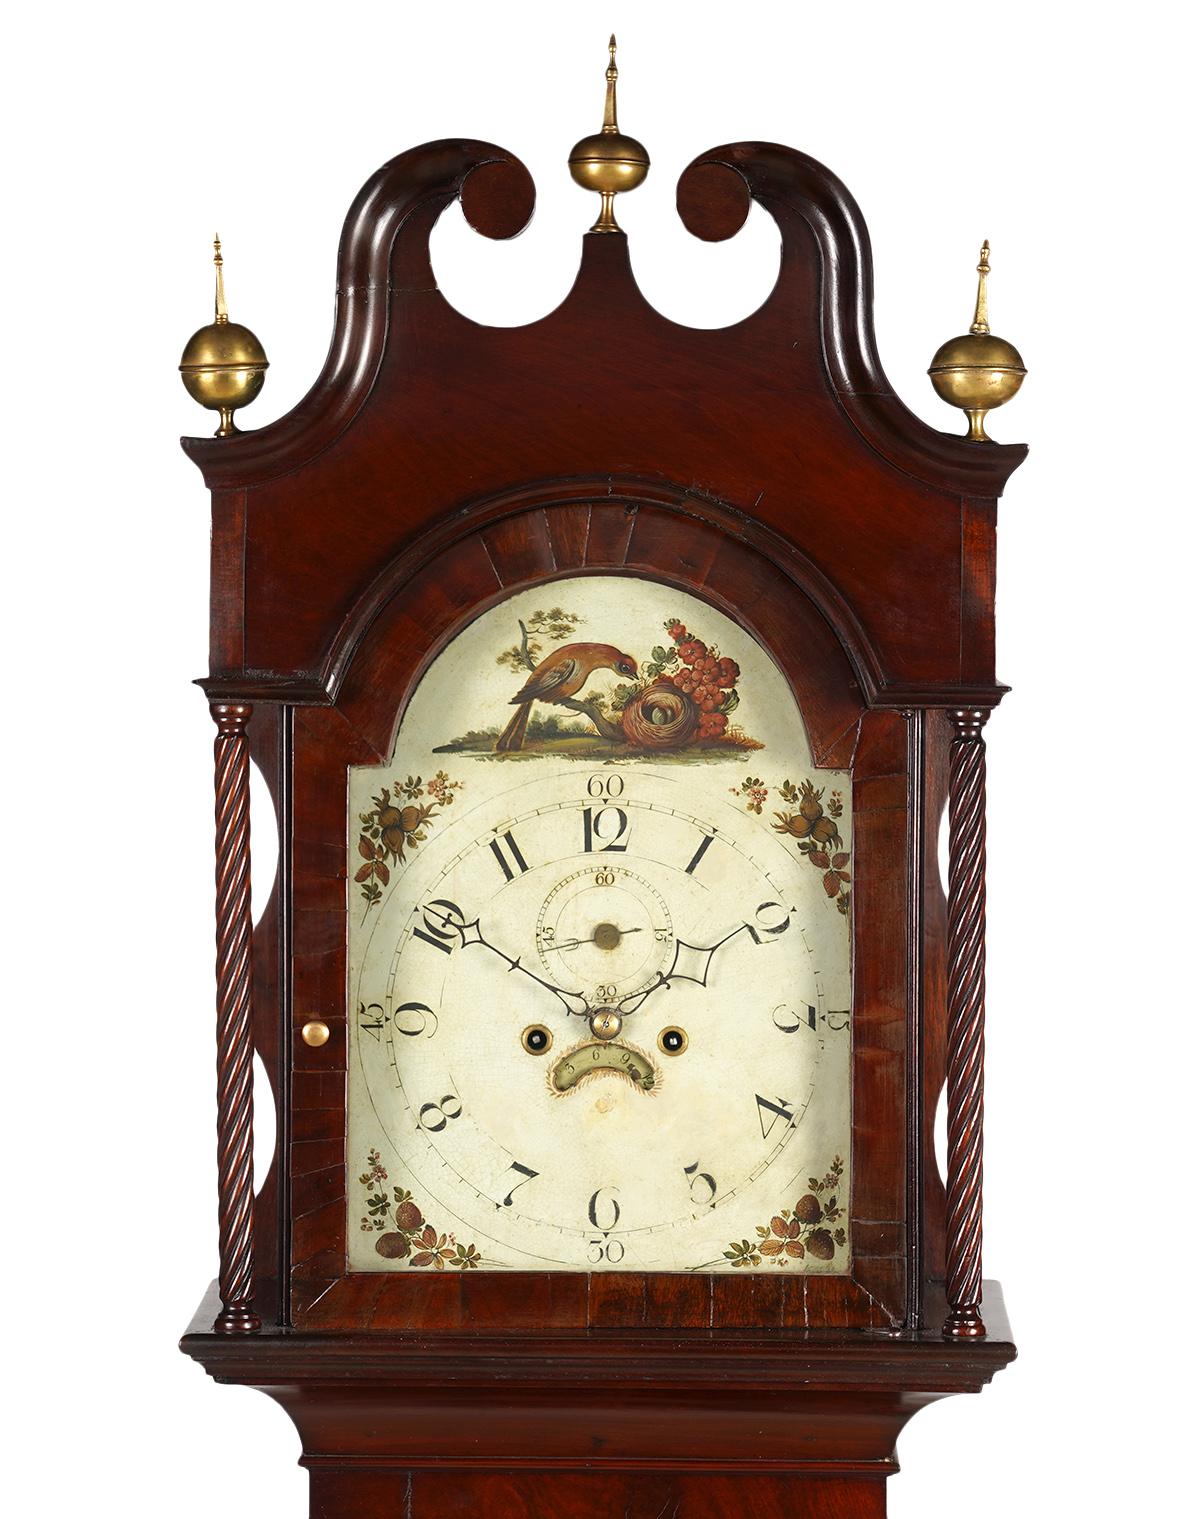 This stately American Chippendale tall case grandfathers 8 day mahogany clock features a double scroll split pediment cresting centering a brass globe finial and flanked by identical finials. The painted dial is decorated with bird nest motif and